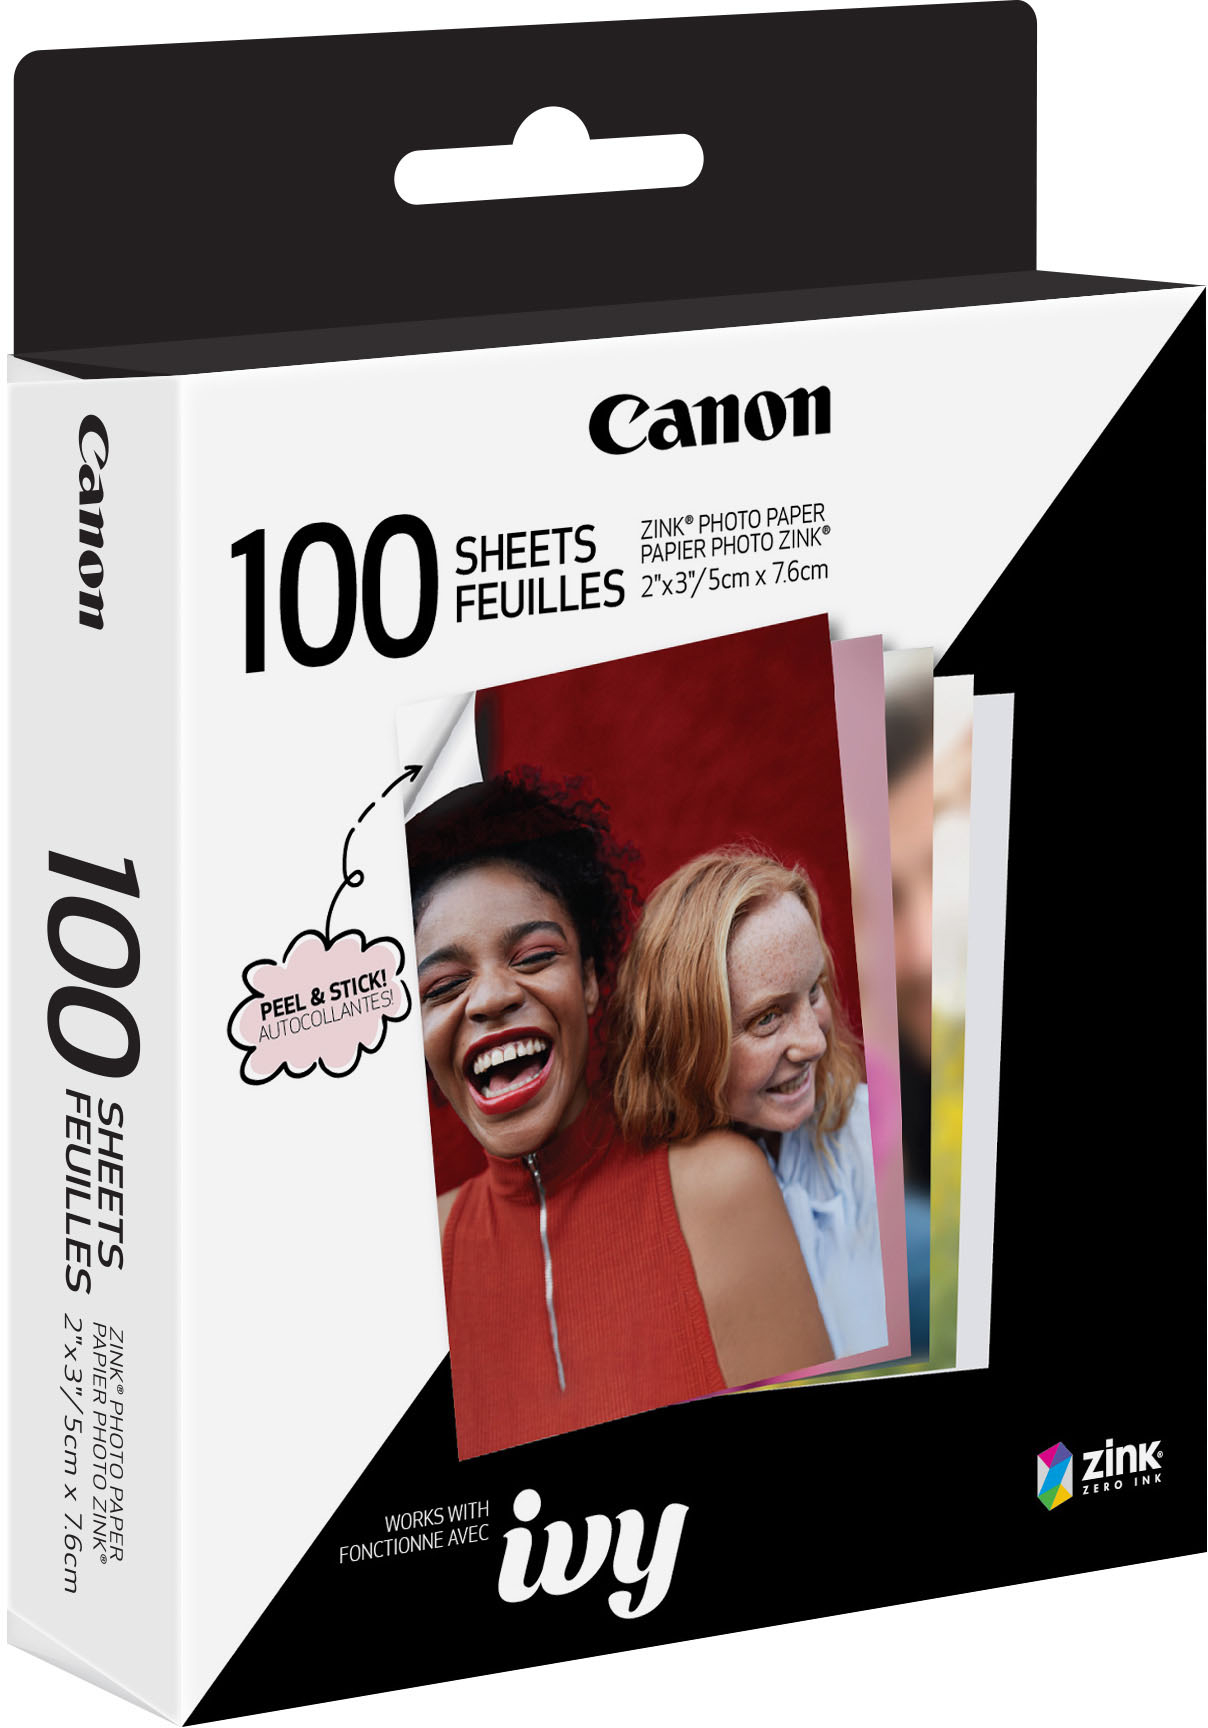 Canon ZINK Glossy Photo 2 x 3 50-Count Paper 3215C001 - Best Buy